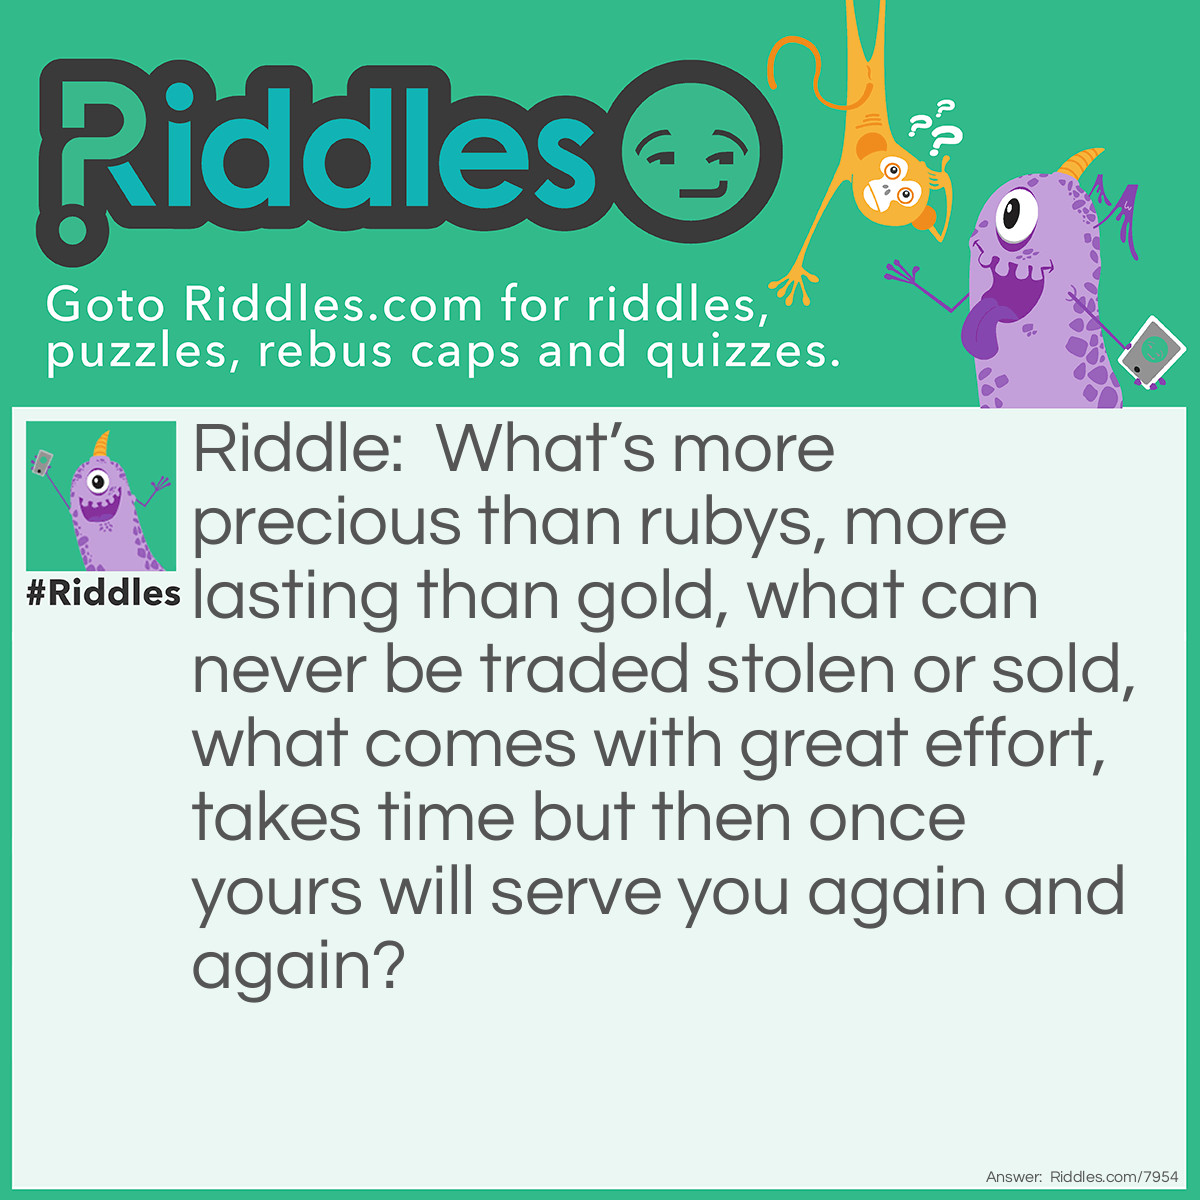 Riddle: What's more precious than rubys, more lasting than gold, what can never be traded stolen or sold, what comes with great effort, takes time but then once yours will serve you again and again? Answer: Knowledge.